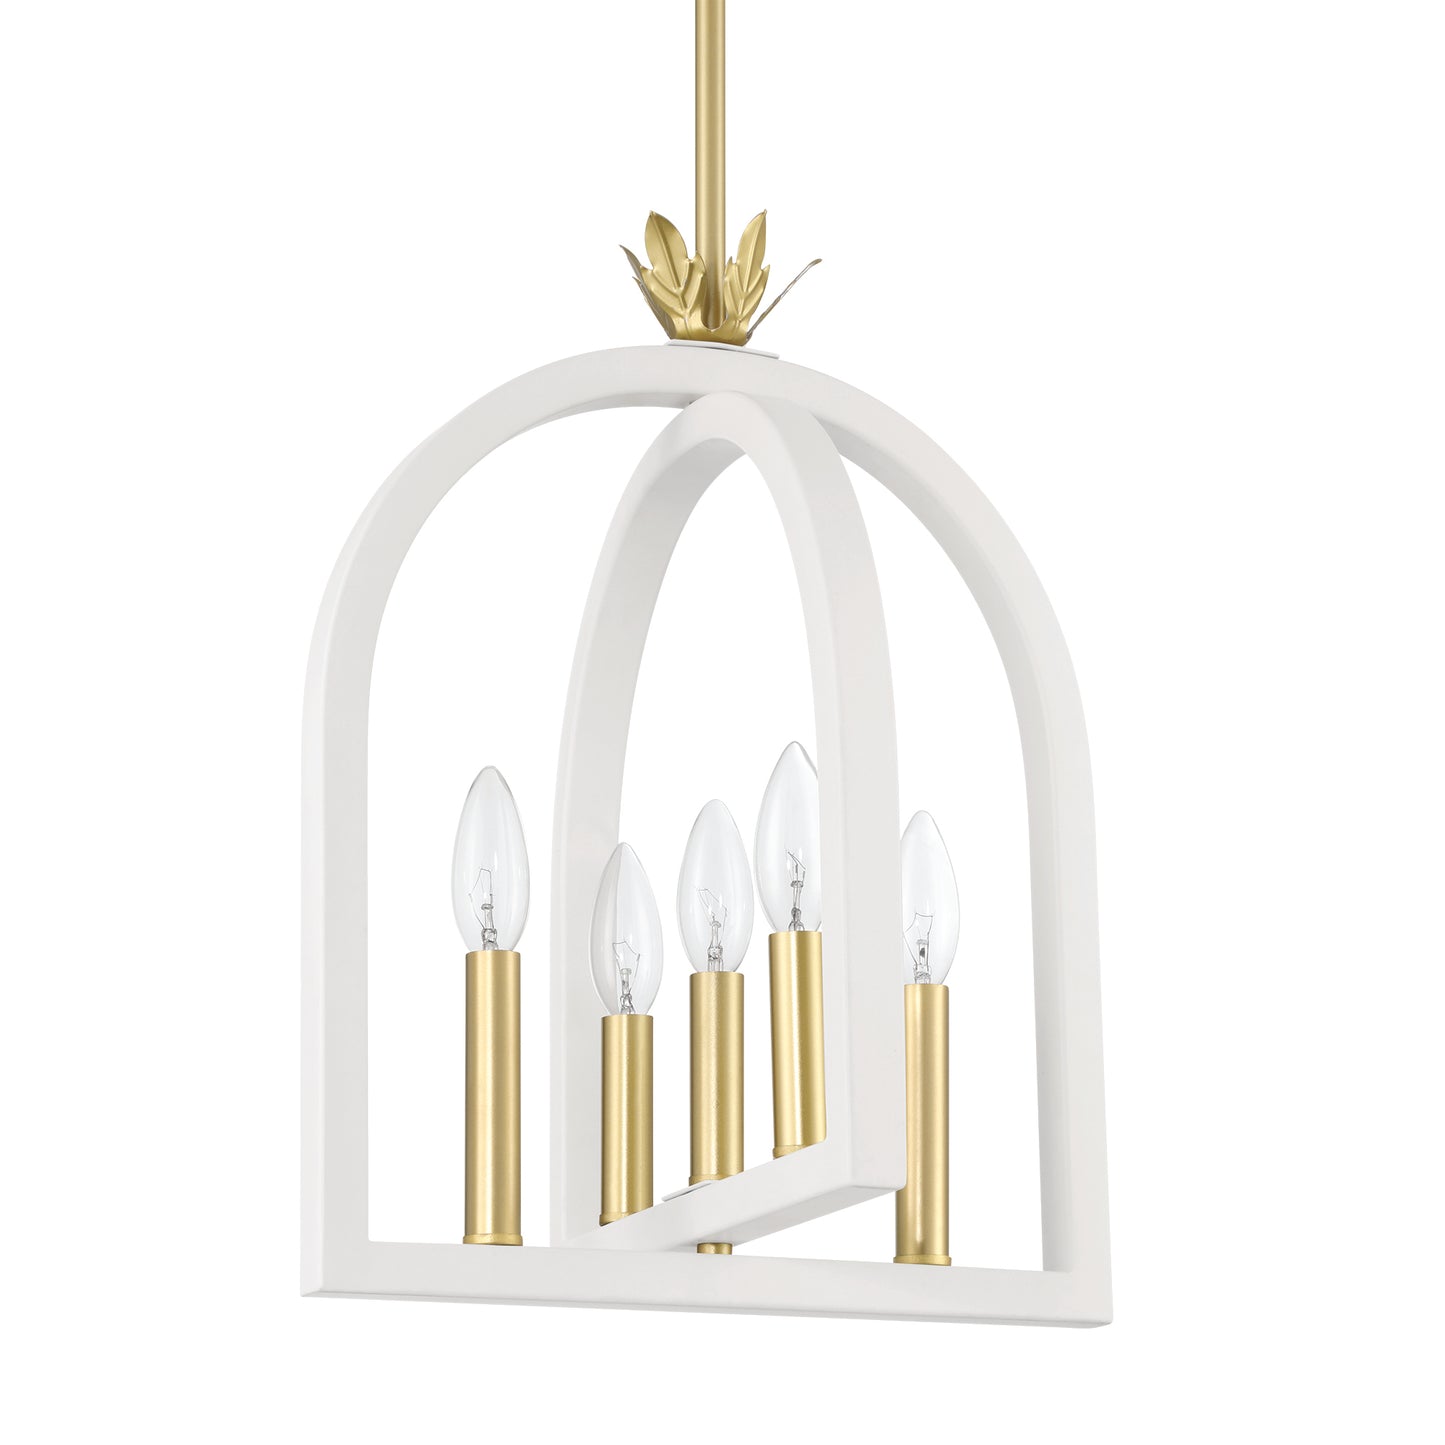 5 light empire lantern chandelier (8) by ACROMA